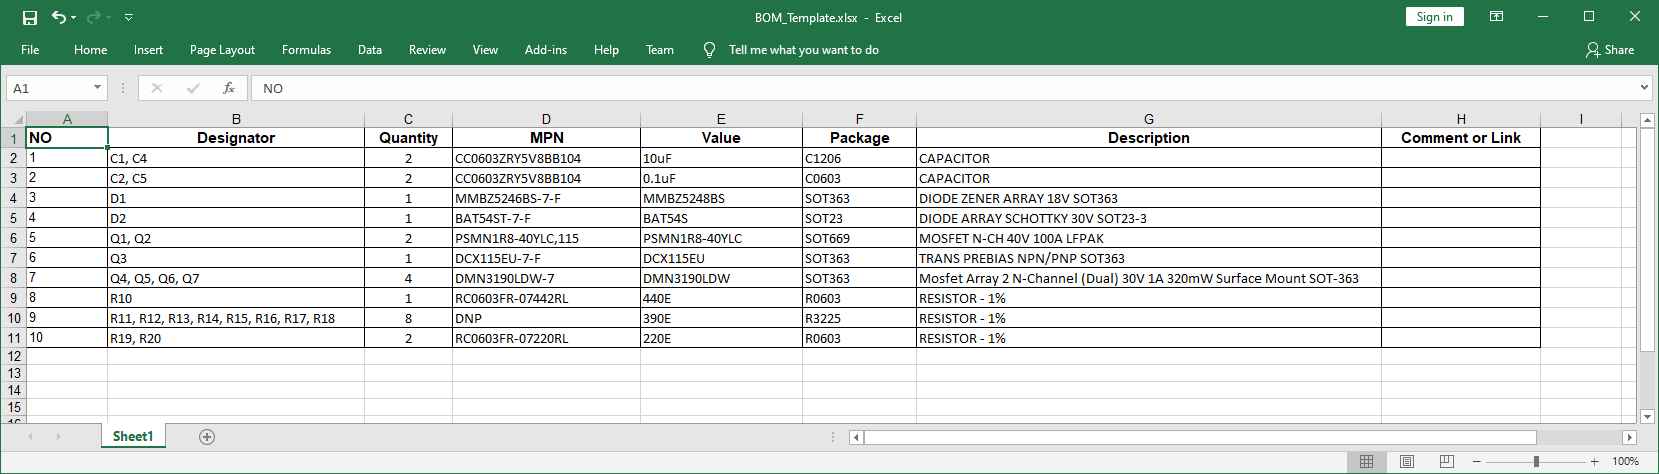 Format of the BOM file (Quantity and MPN fields need to be the correct location)